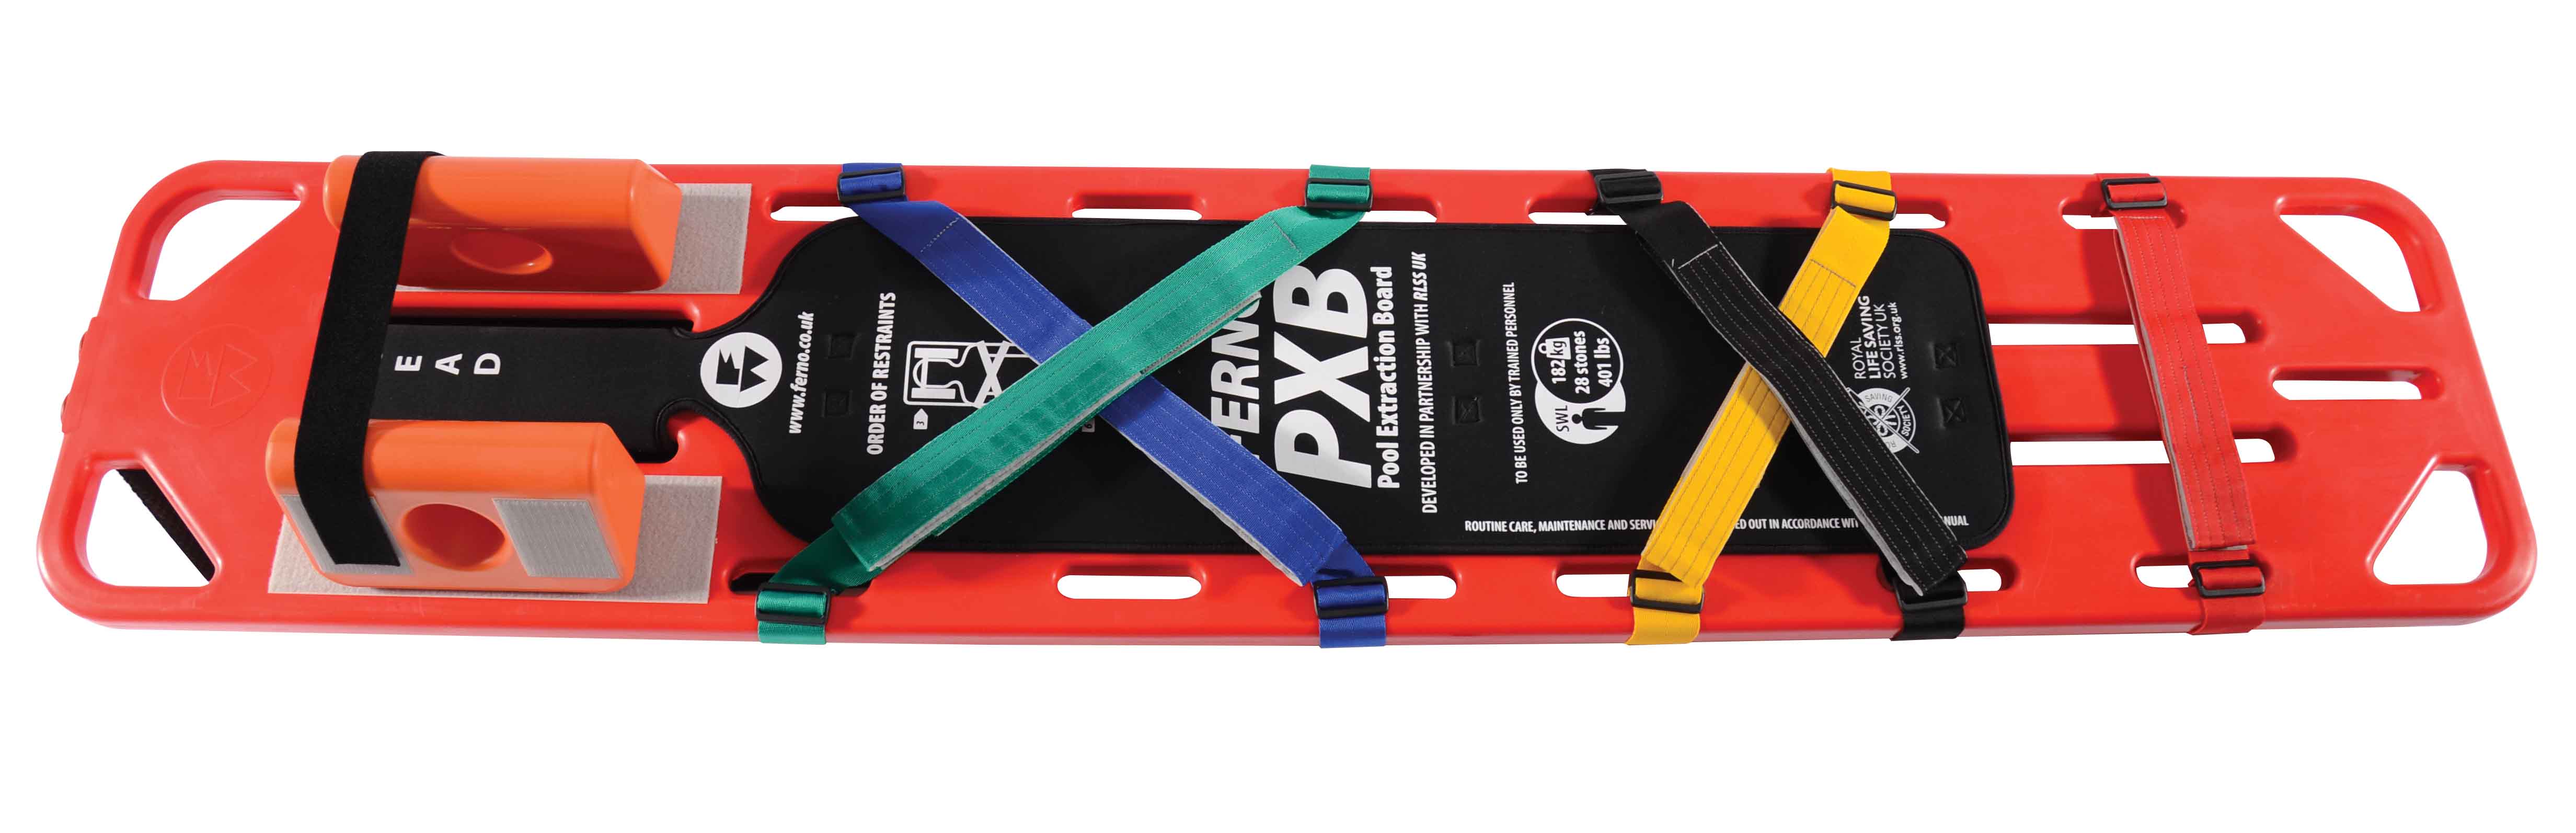 PXB Pool eXraction Board